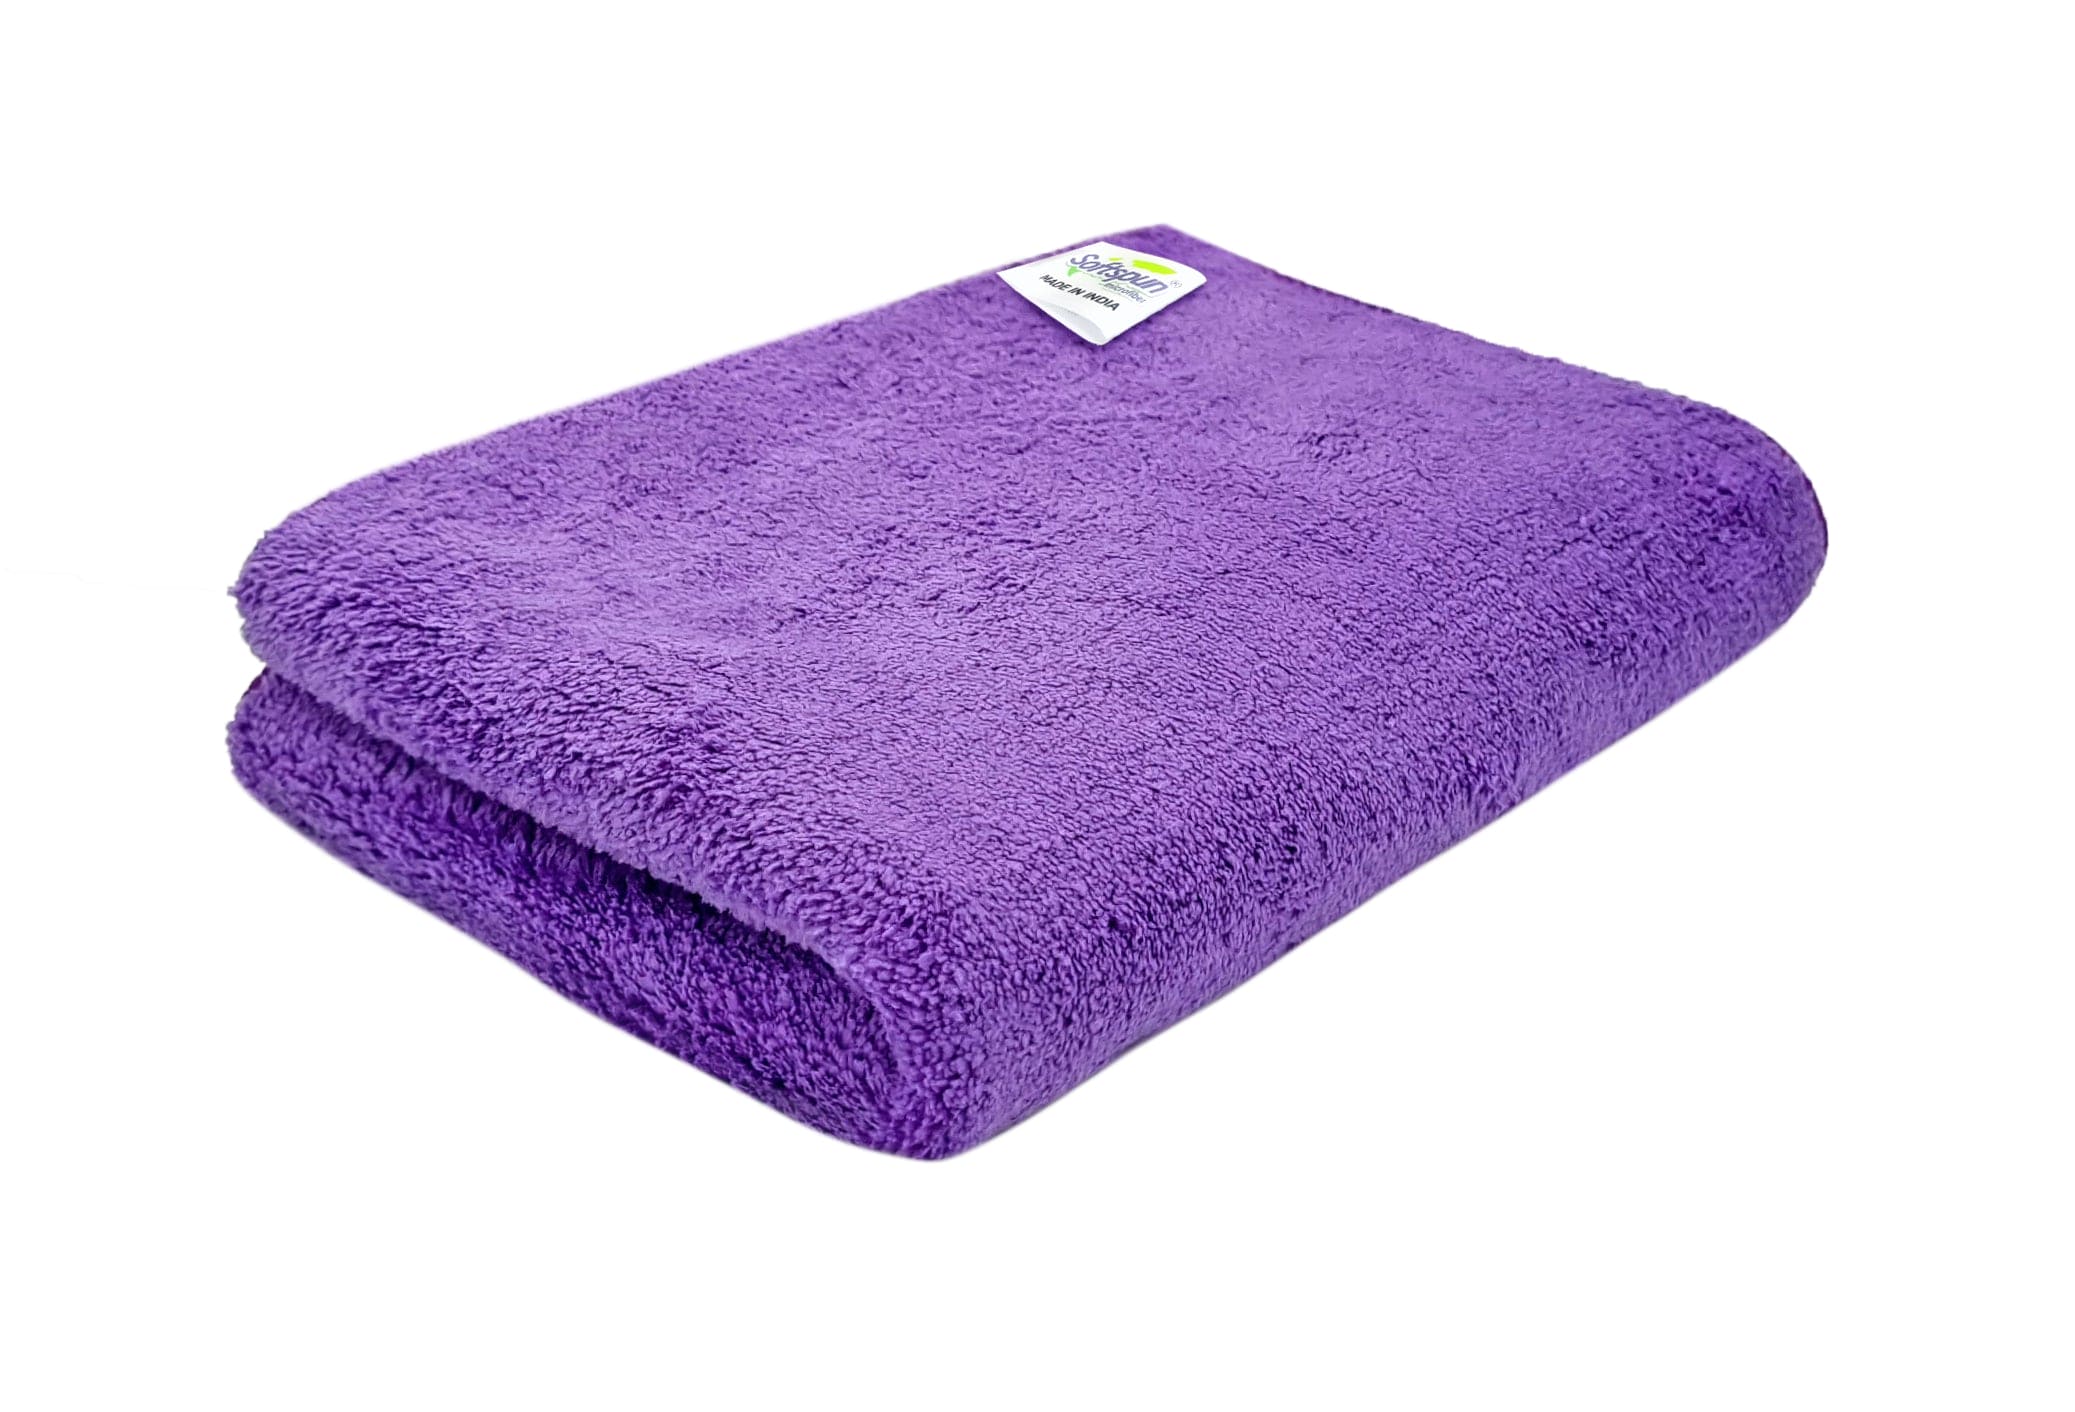 SOFTSPUN 900 GSM, Microfiber Double Layered Cloth Towel Set,  Extra Thick Microfiber Cleaning Cloths Perfect for Bike, Auto, Cars Both Interior and Exterior